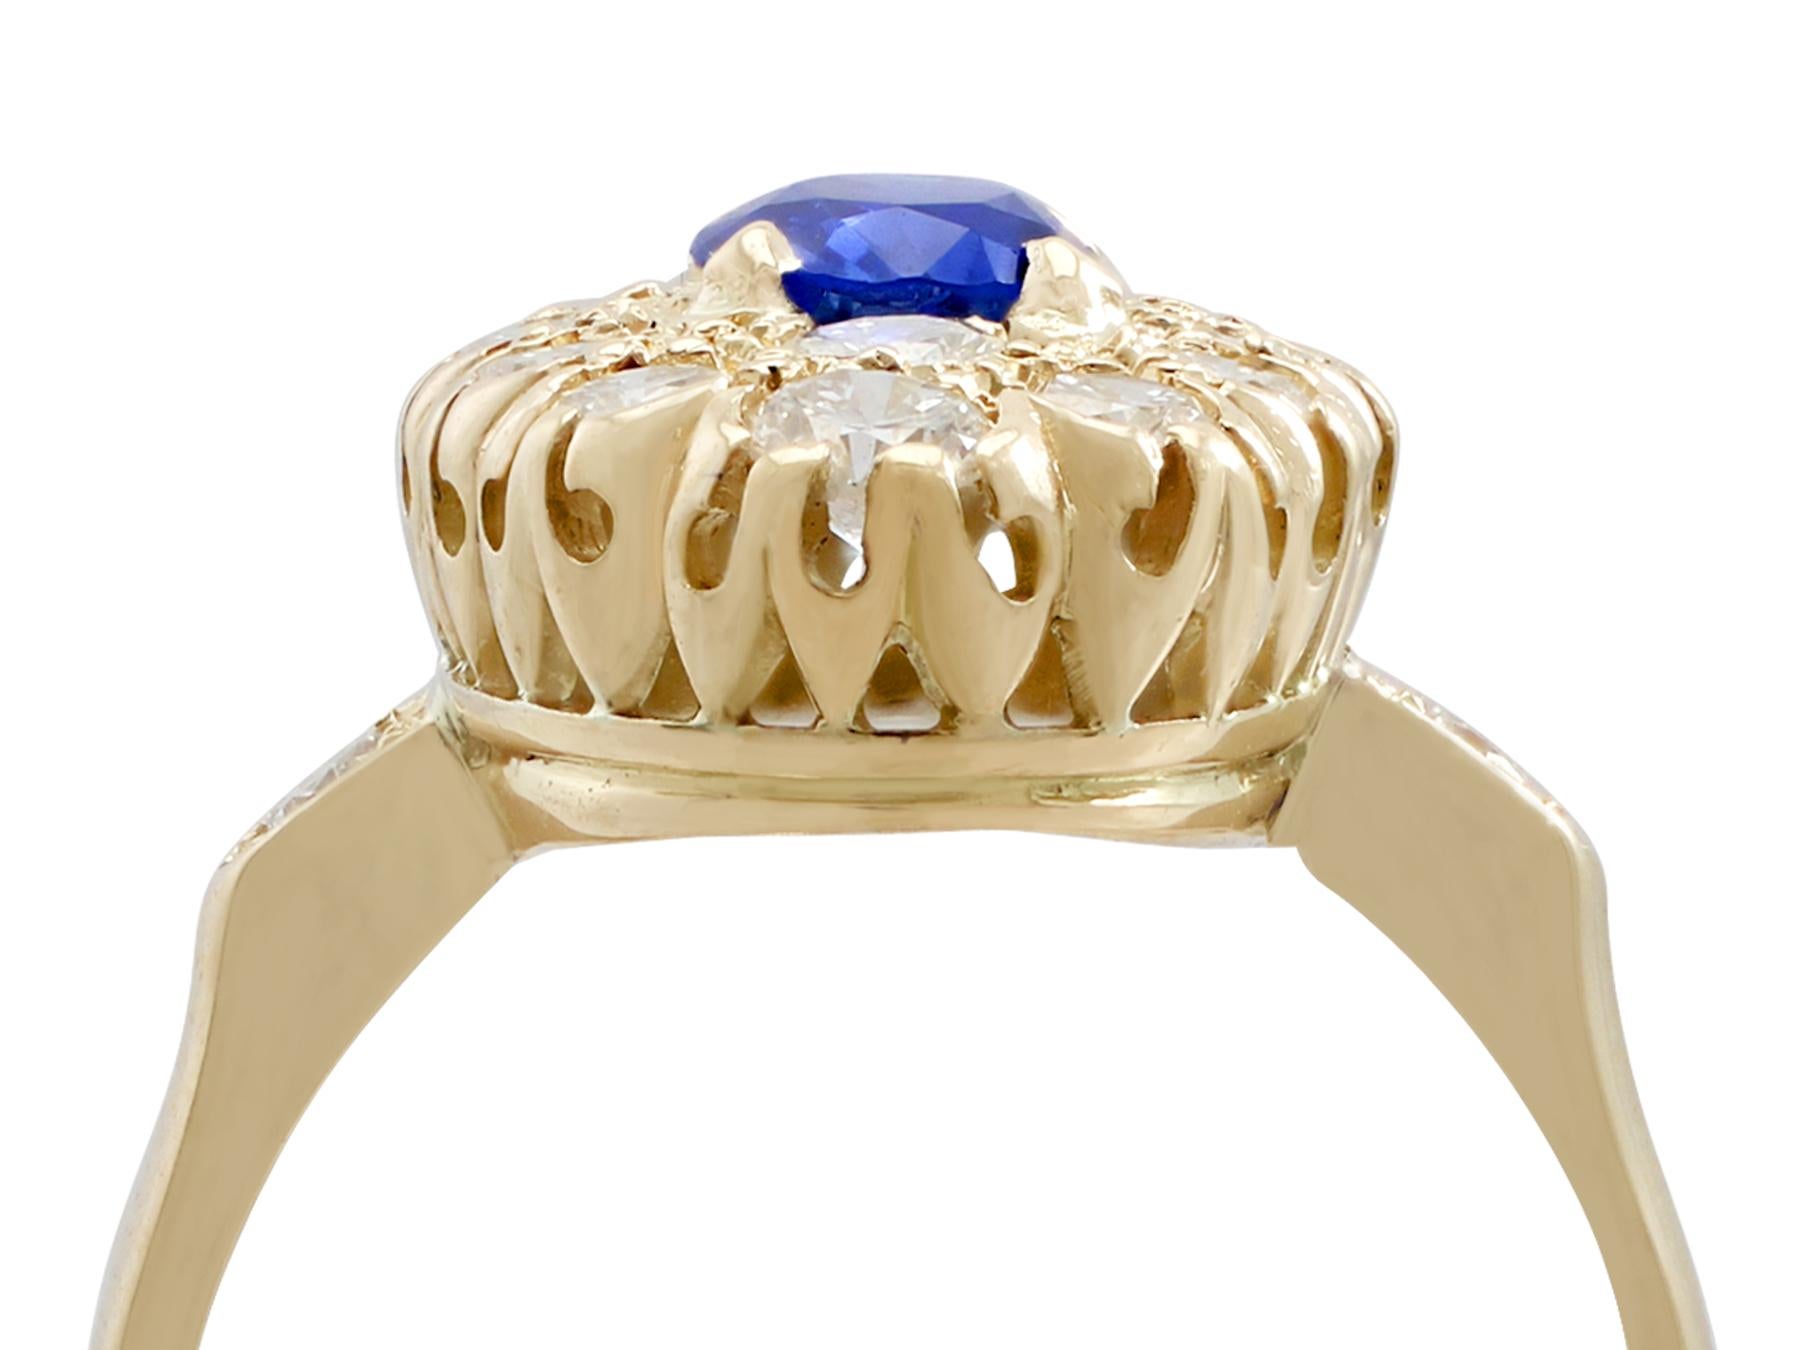 An impressive vintage French 0.85 carat blue sapphire and 0.74 carat diamond, 18 karat yellow gold cocktail ring; part of our diverse gemstone jewelry collections.

This fine and impressive oval sapphire and diamond ring has been crafted in 18k